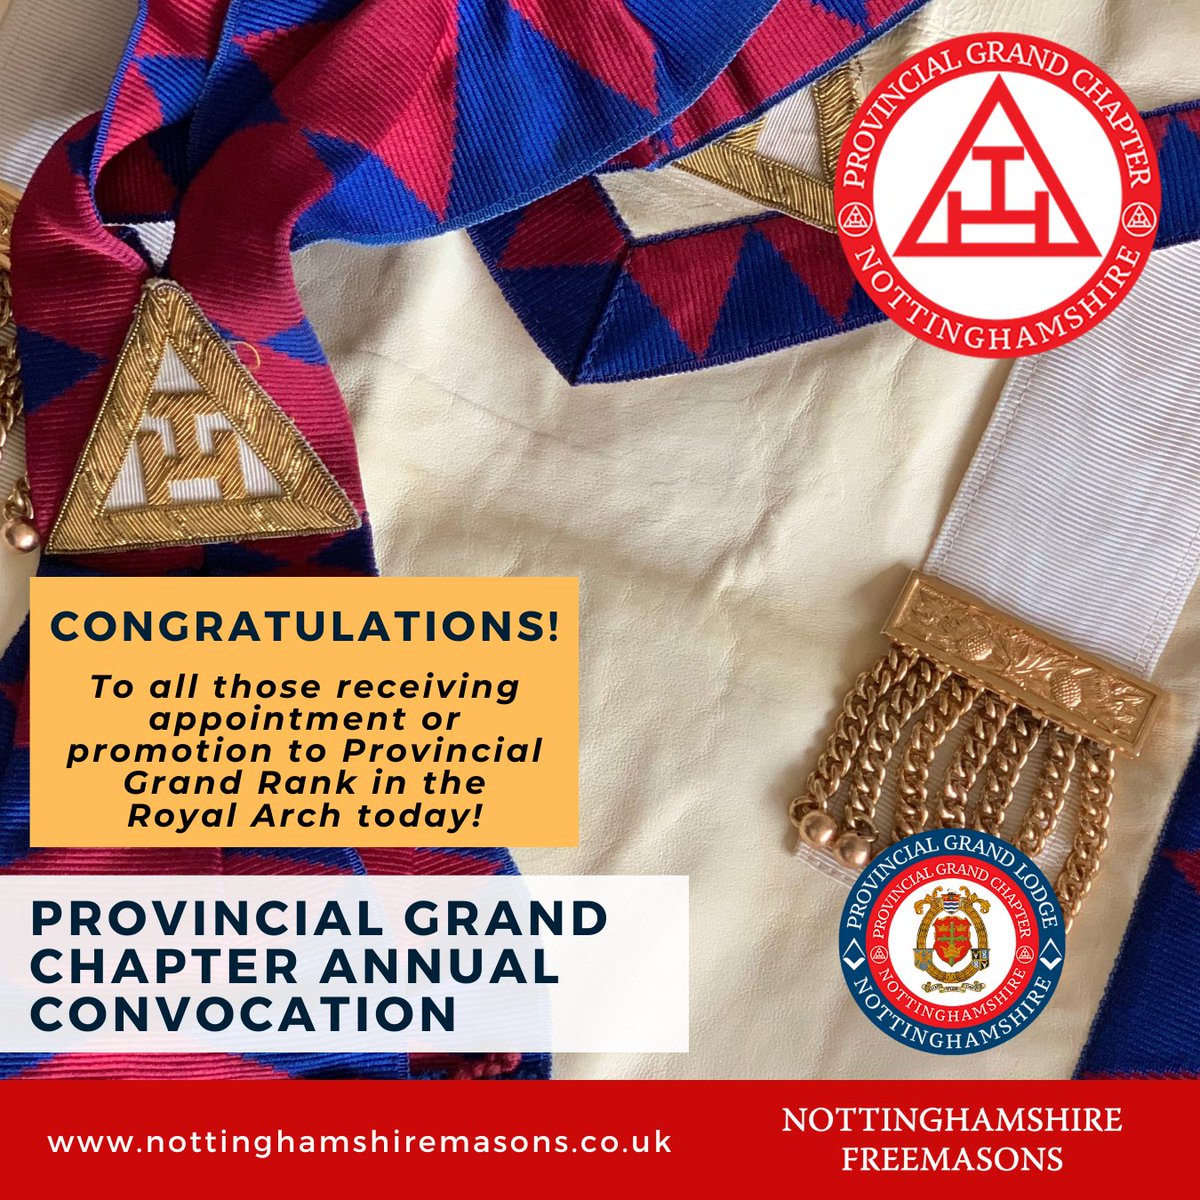 Congratulations to all Nottinghamshire Freemasons receiving appointment or promotion in Provincial Grand Rank in the Royal Arch at the Annual Convocation of Provincial Grand Chapter today! #Freemasons #royalarch